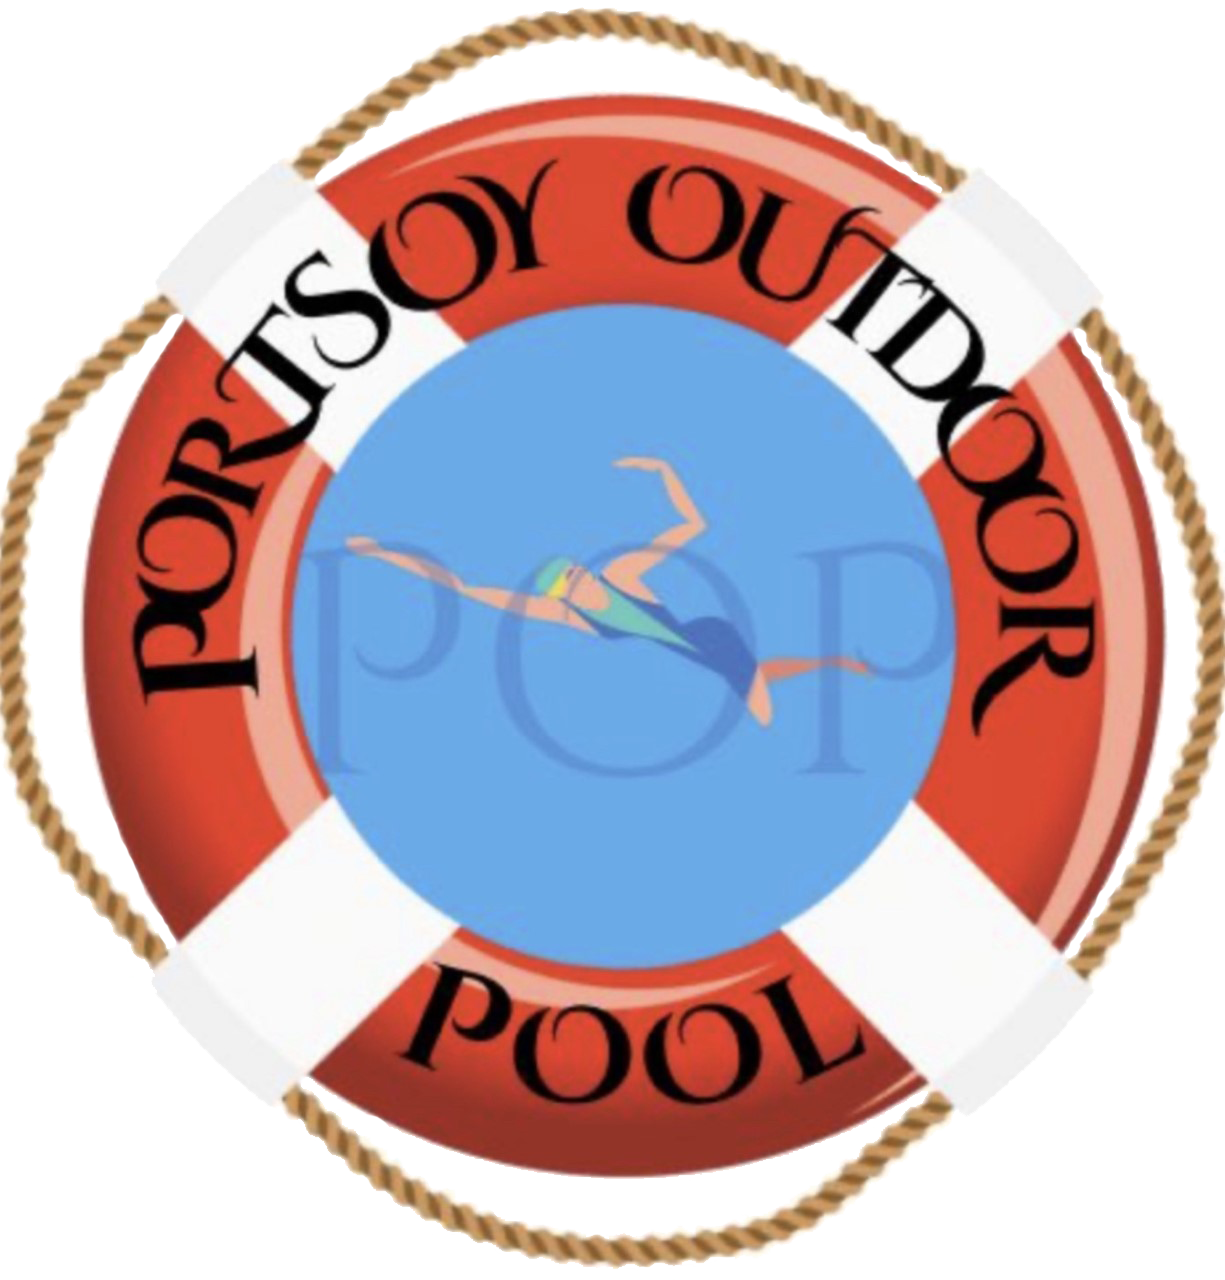 Portsoy Outdoor Pool